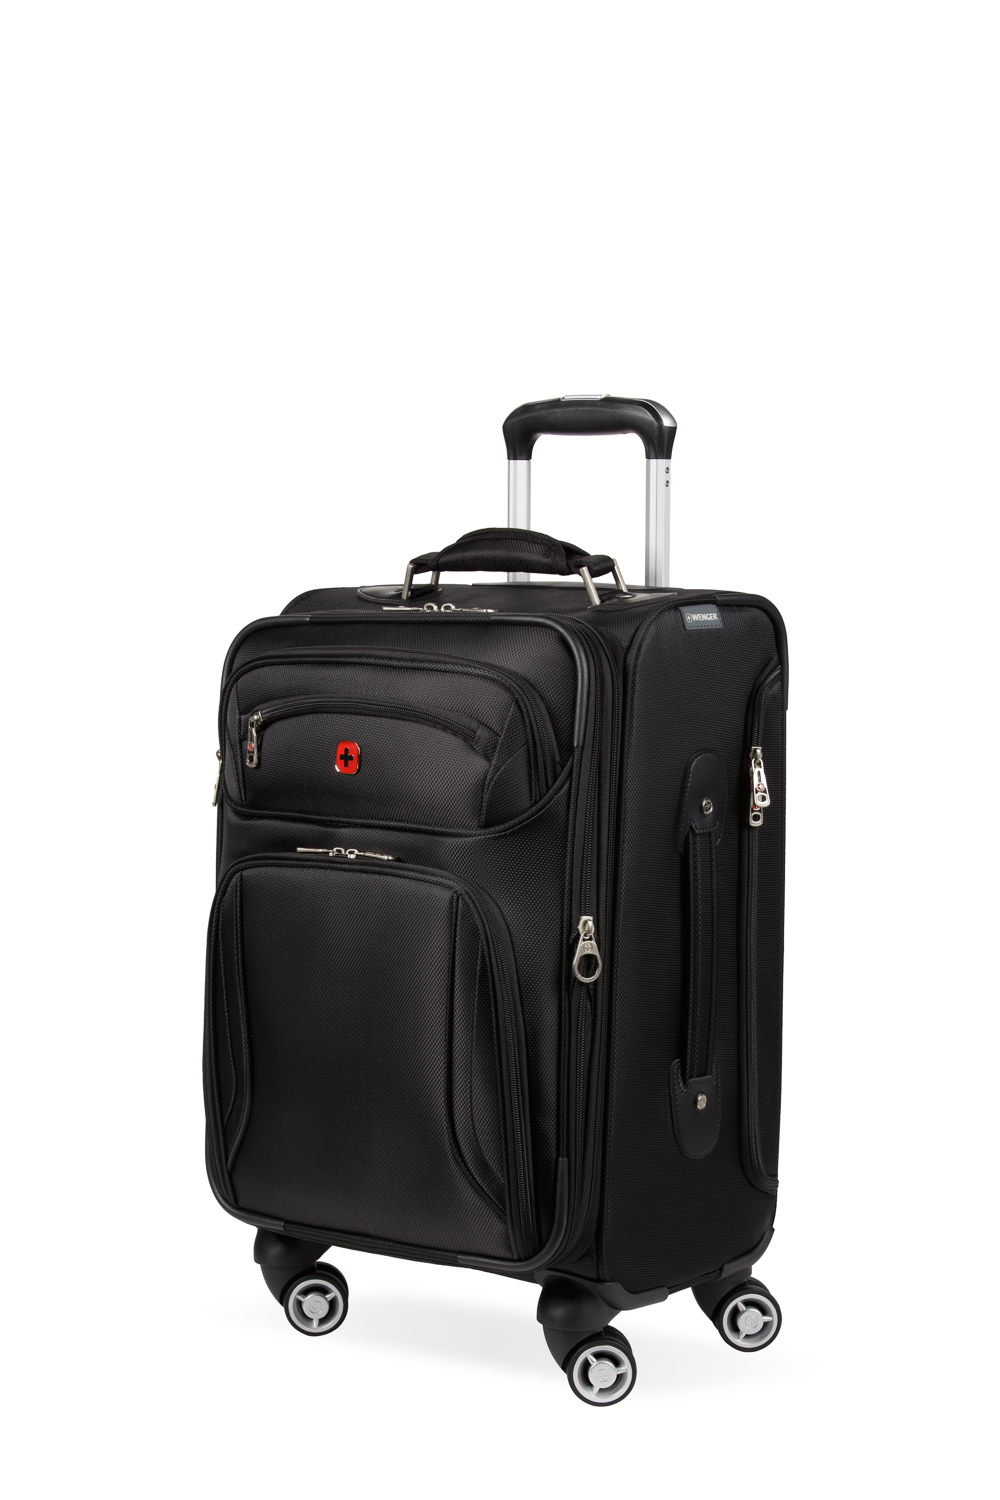 Wenger Identity Expandable Laptop Carry On Spinner Luggage 